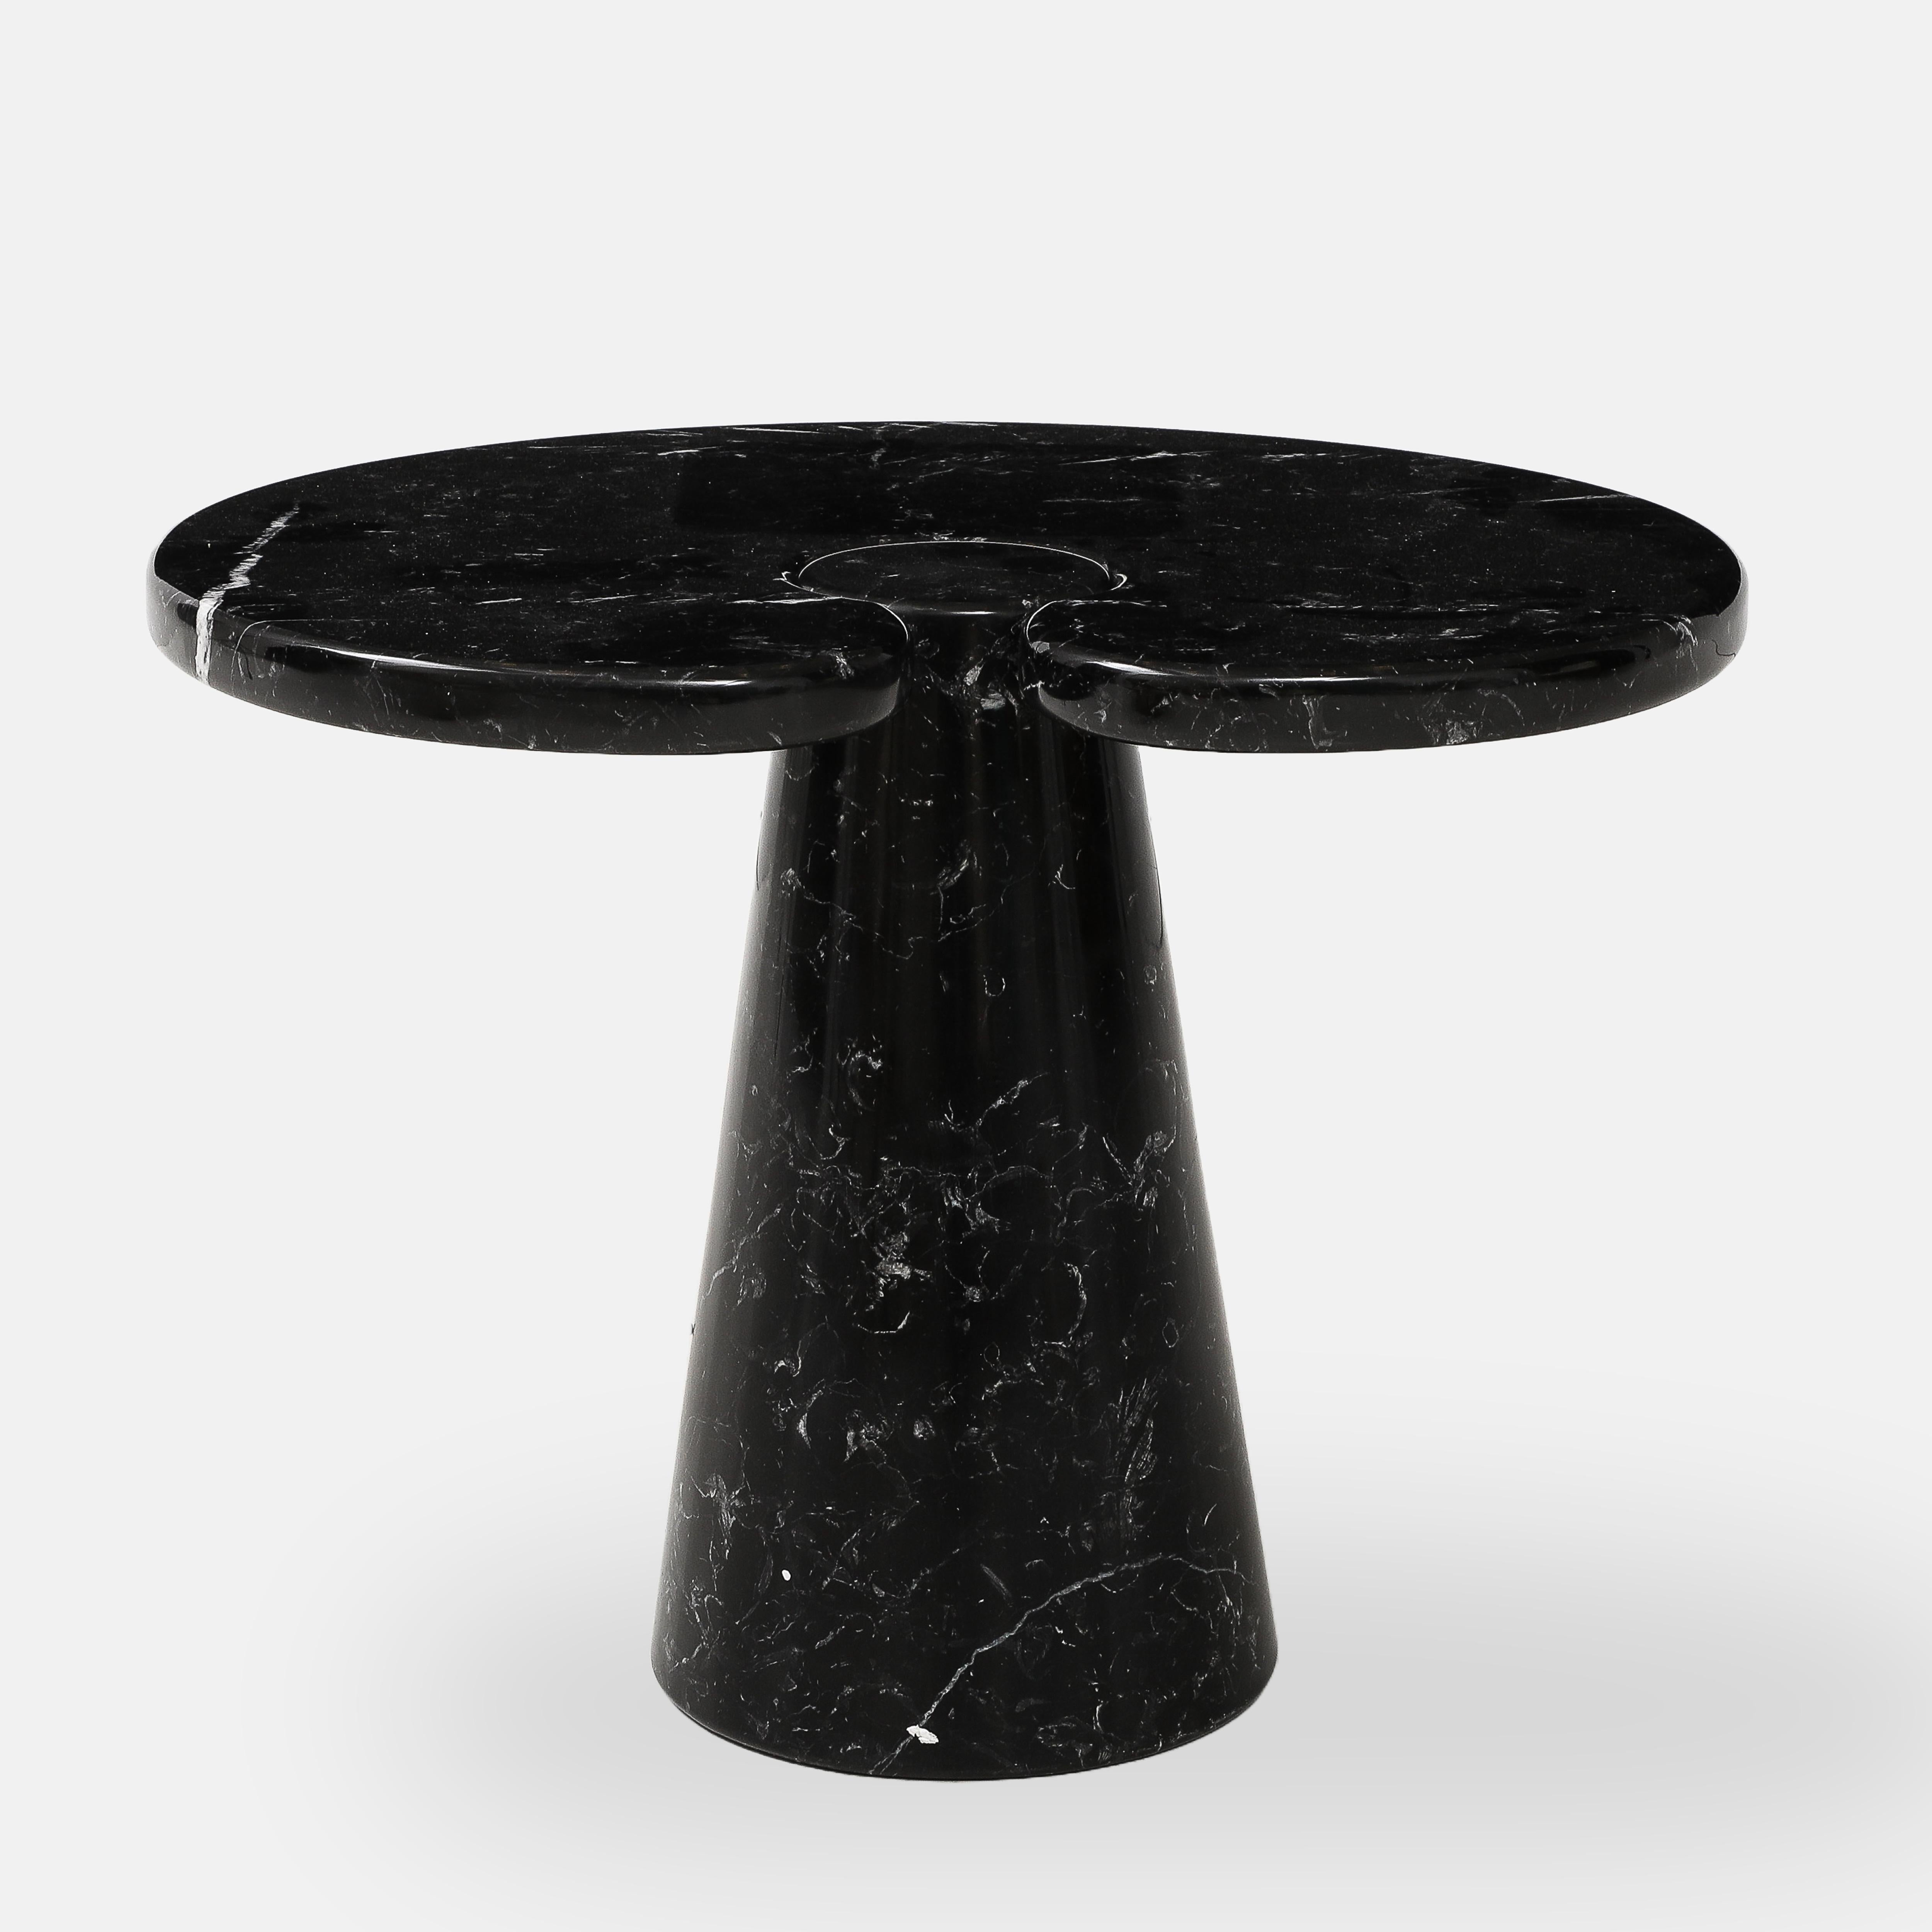 Mid-Century Modern Angelo Mangiarotti Nero Marquina Marble Side Table from 'Eros' Series, 1971 For Sale